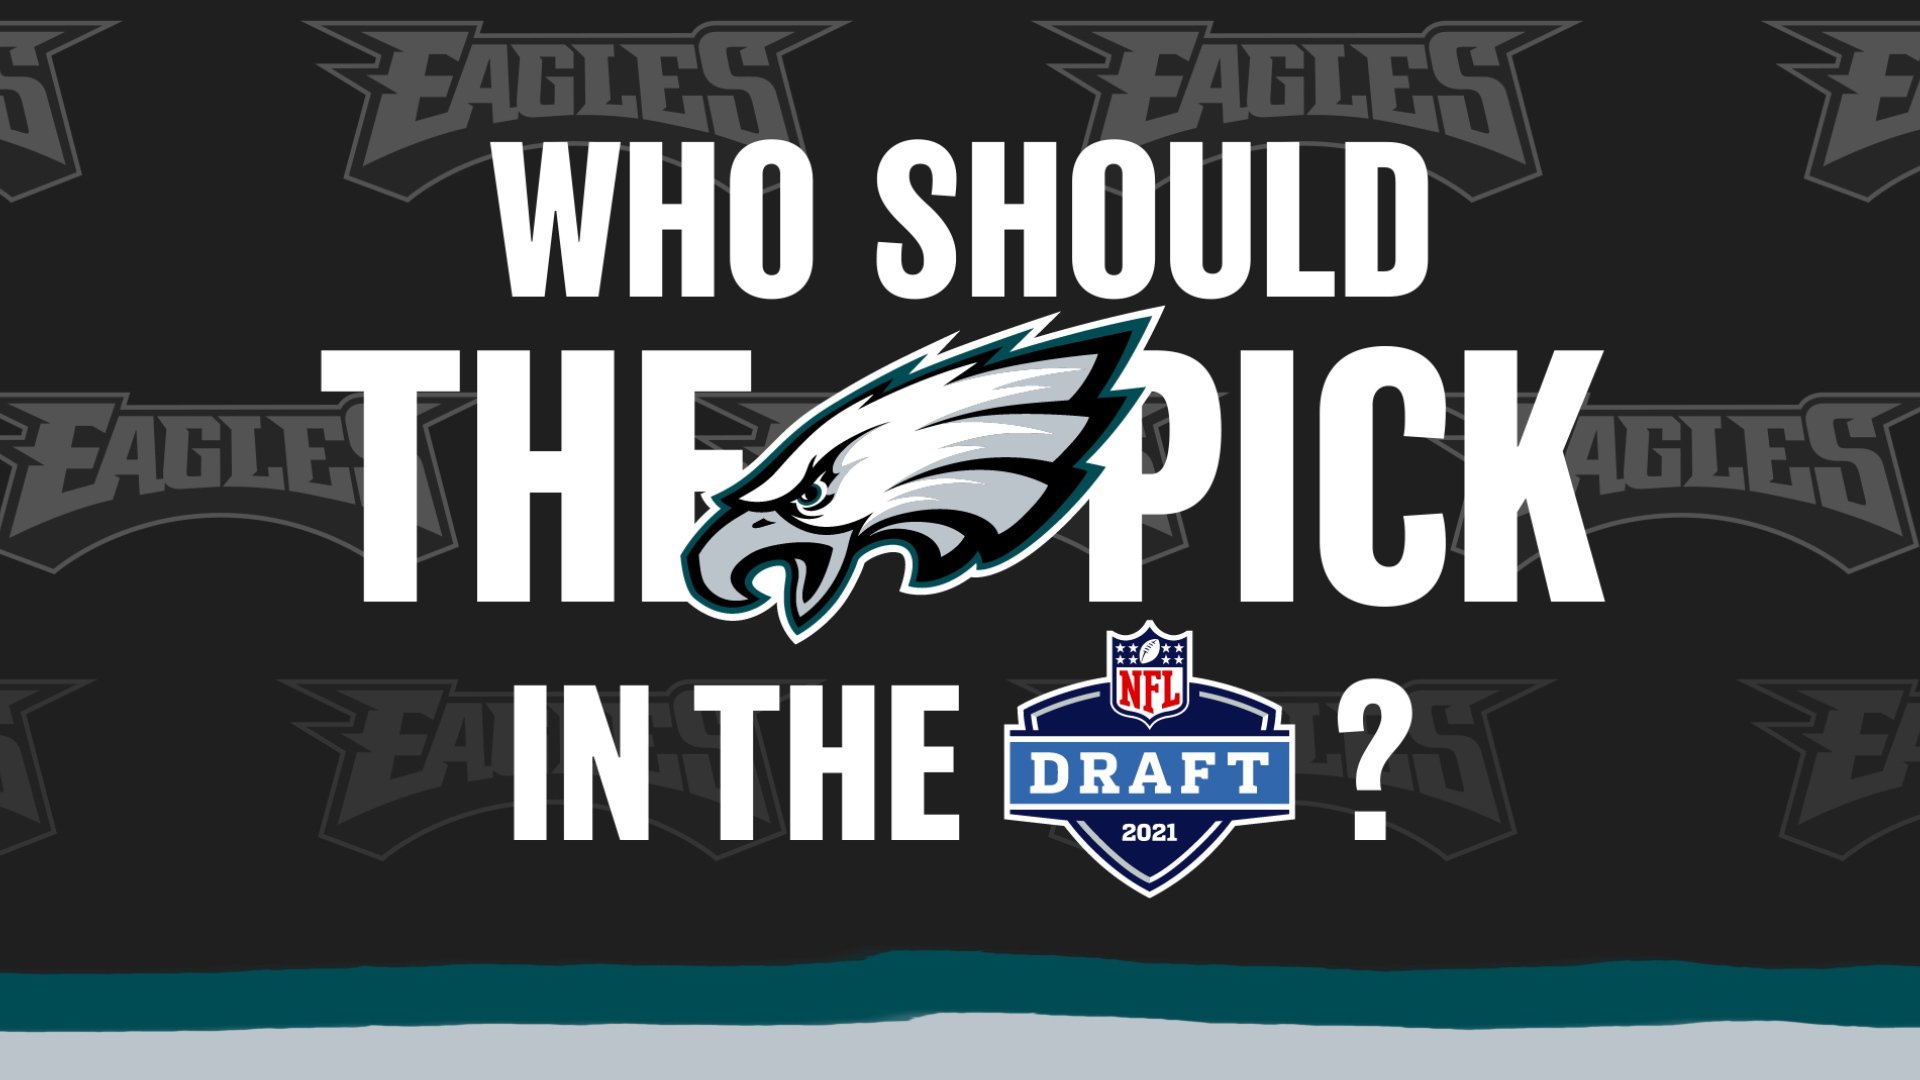 Who should the Philadelphia Eagles select in the 2021 NFL Draft?